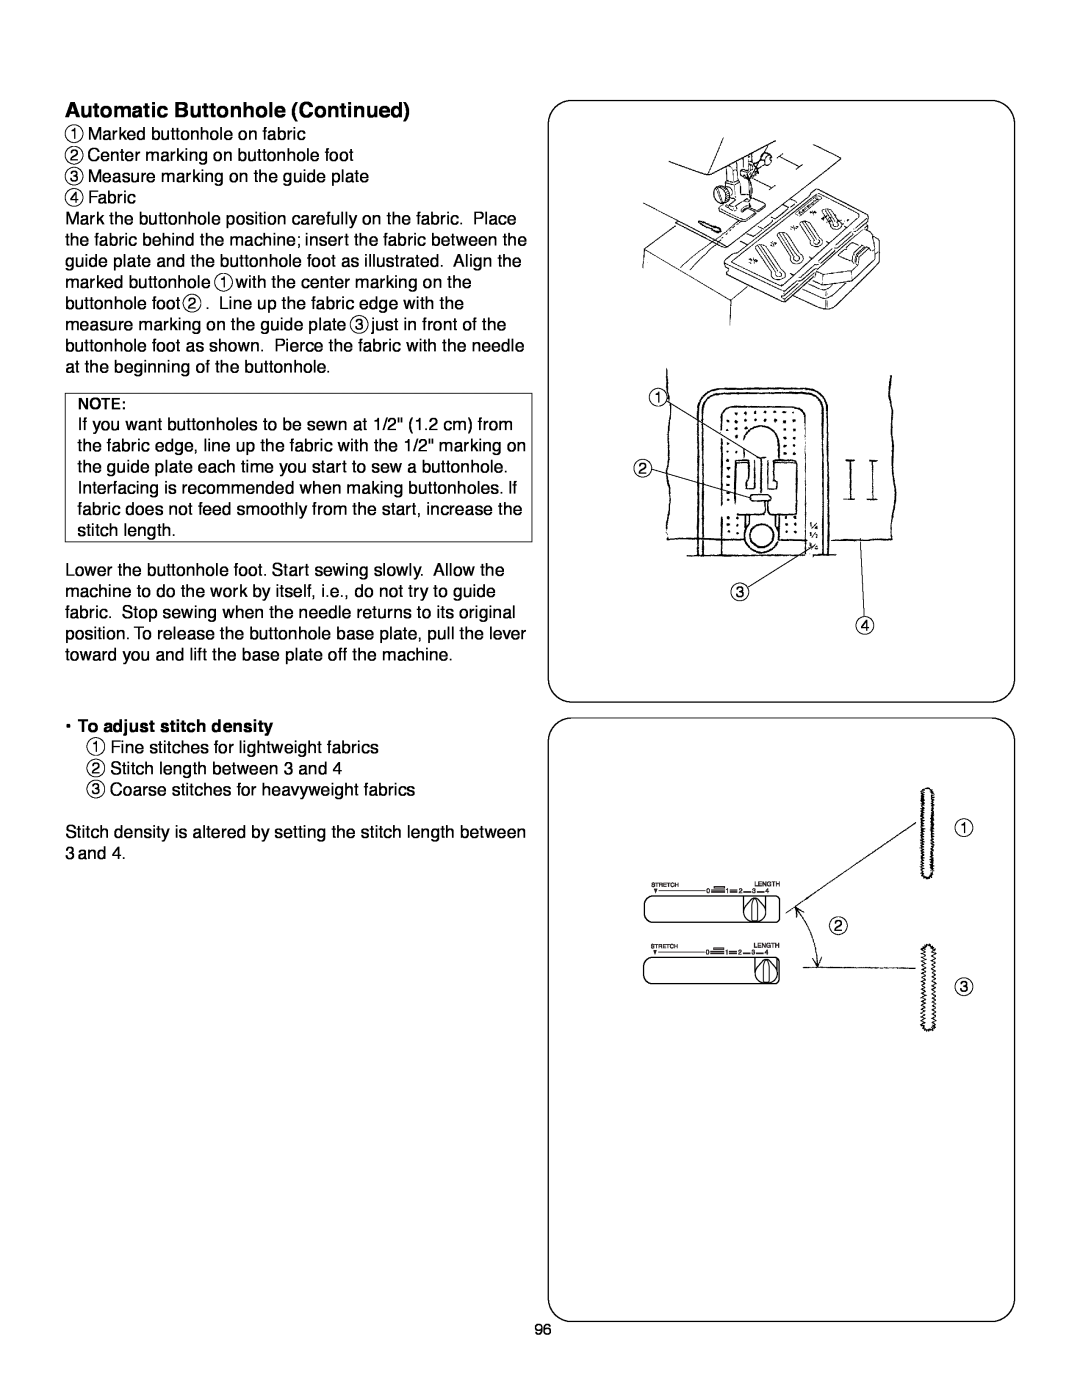 Janome MS-5027 instruction manual To adjust stitch density, Automatic Buttonhole Continued 